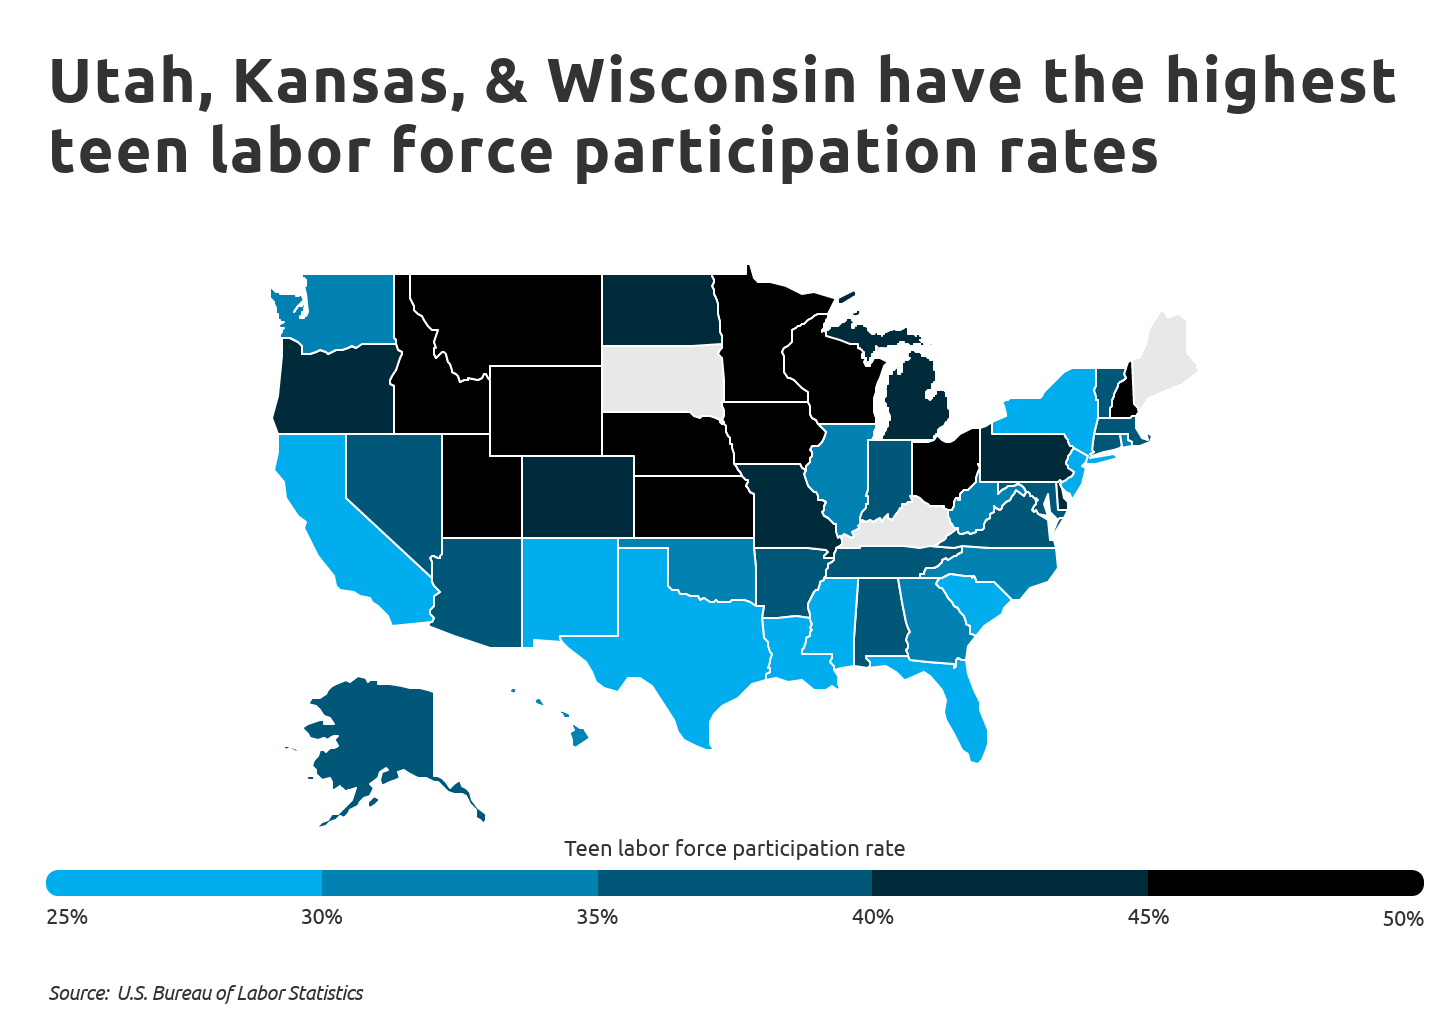 UT, KS, WI have the highest teen labor force participation rates